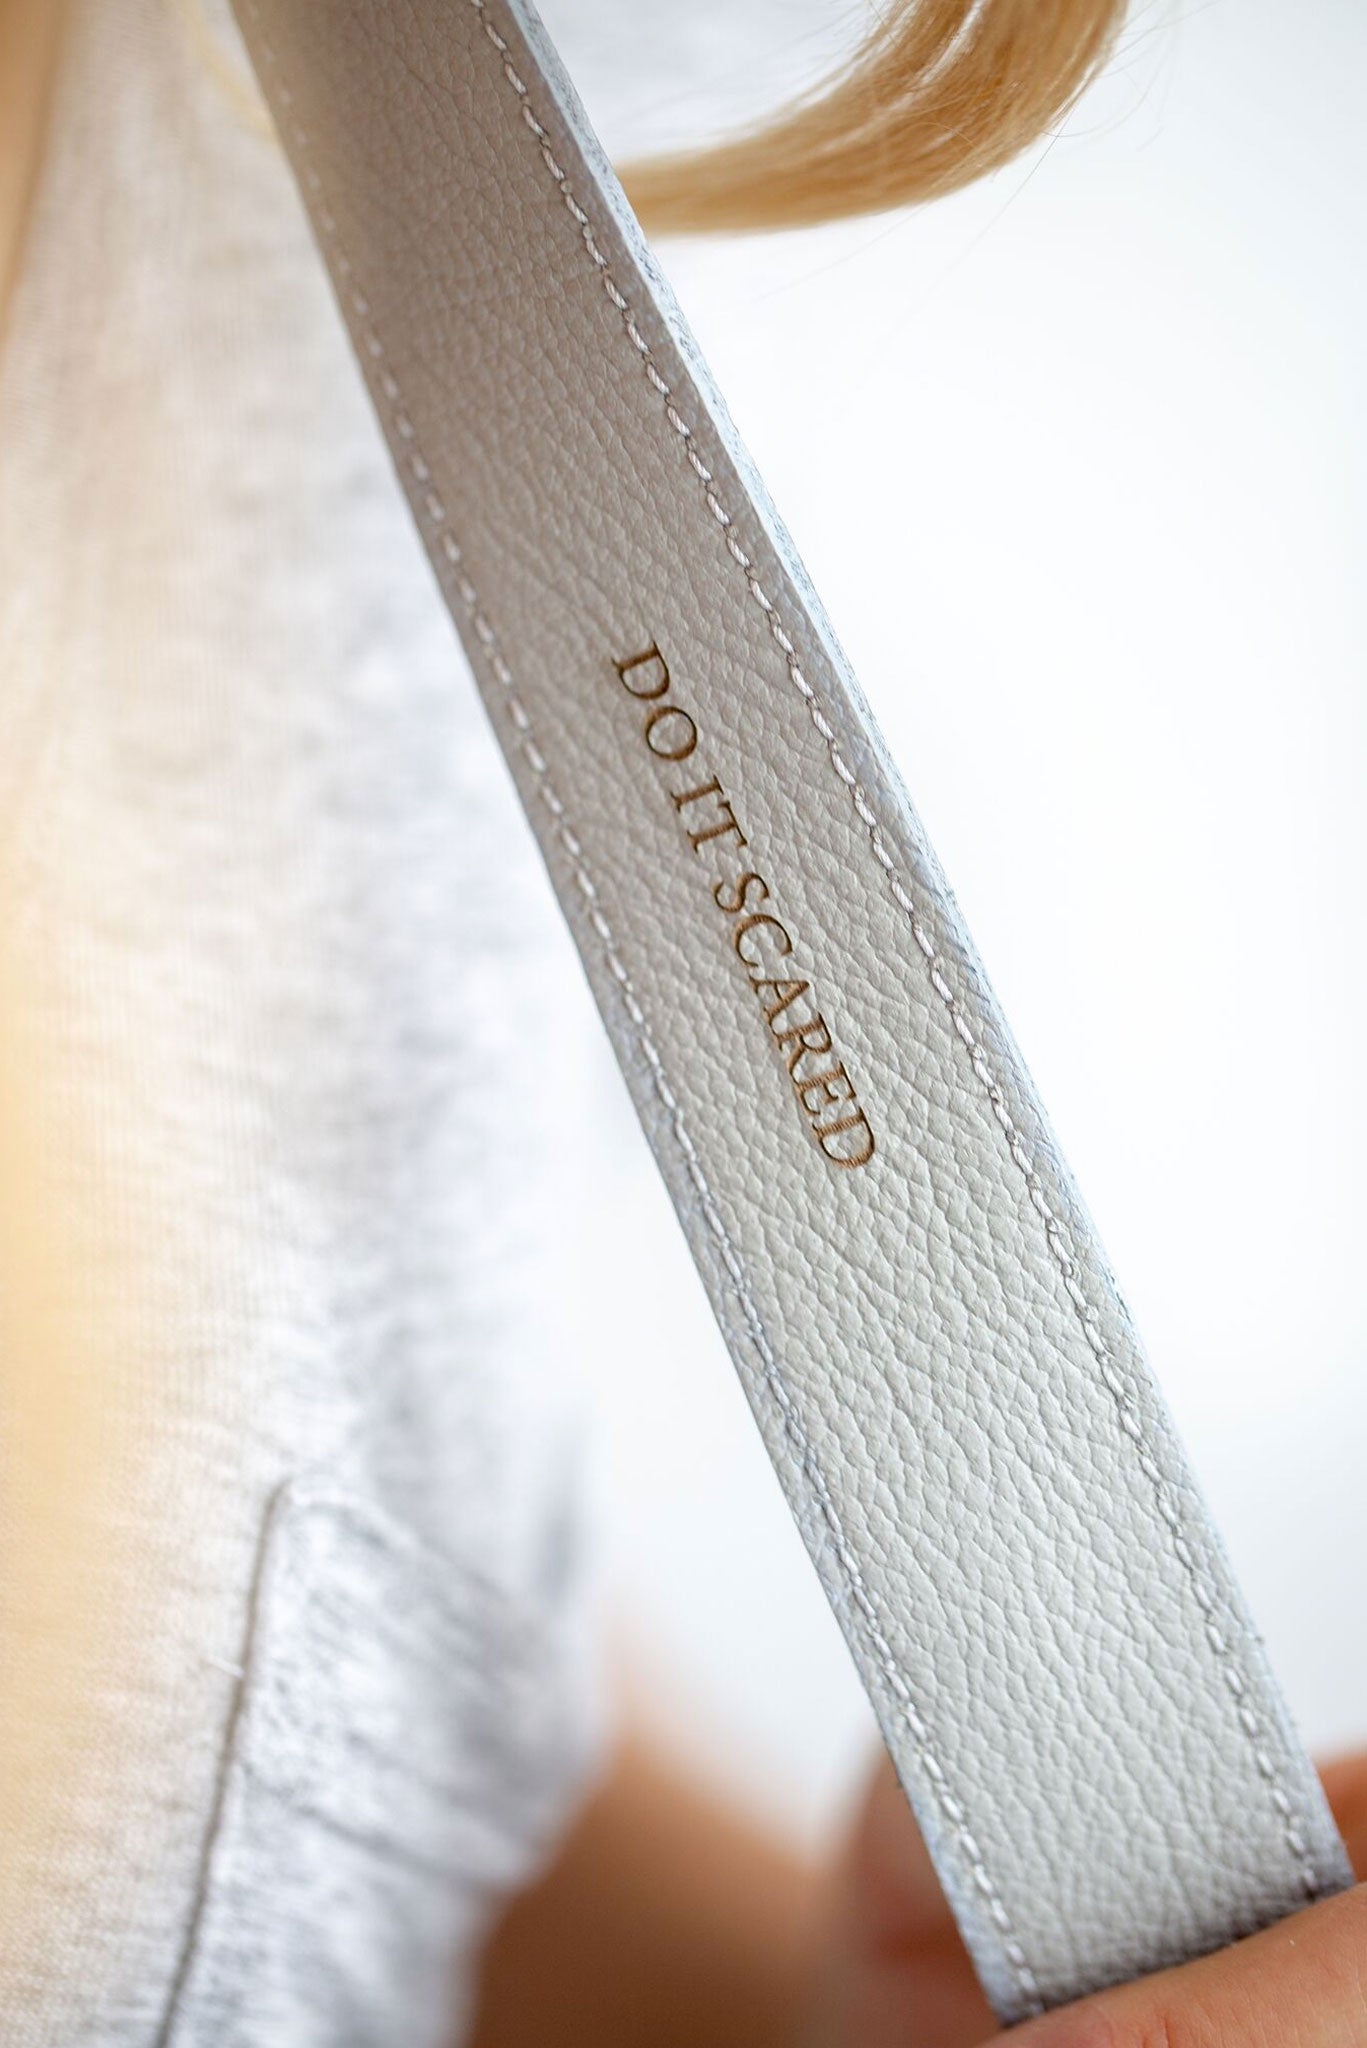 FOTO | The Designer in Dove - a dove grey genuine pebbled leather camera strap that can be personalized with a monogram or business logo, making this leather camera strap the perfect personalized gift.